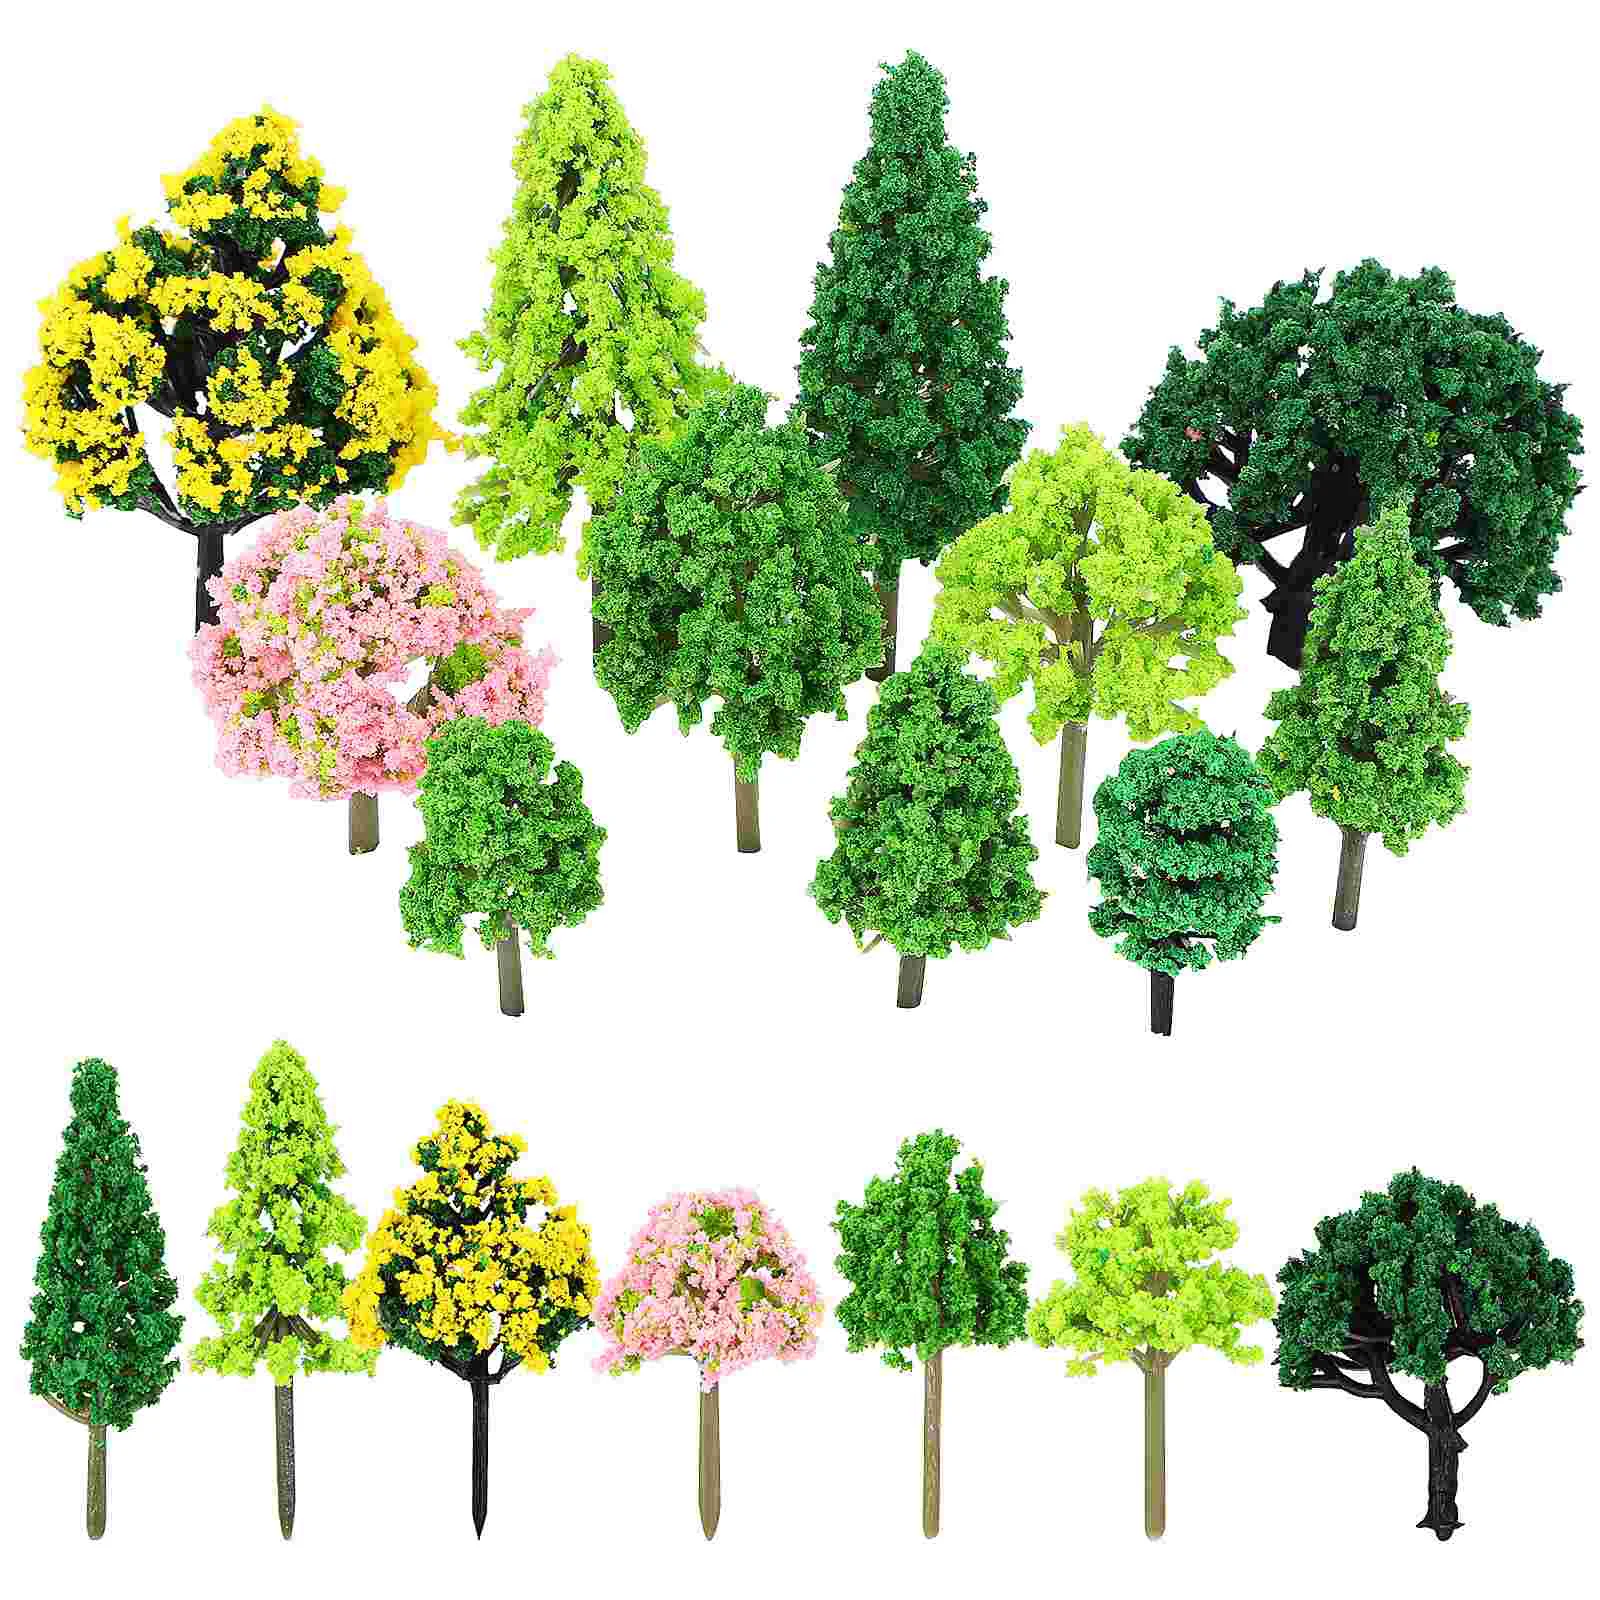 

55pcs Miniature Trees Mixed Model Trees Accessories Model Scenery Architecture Trees